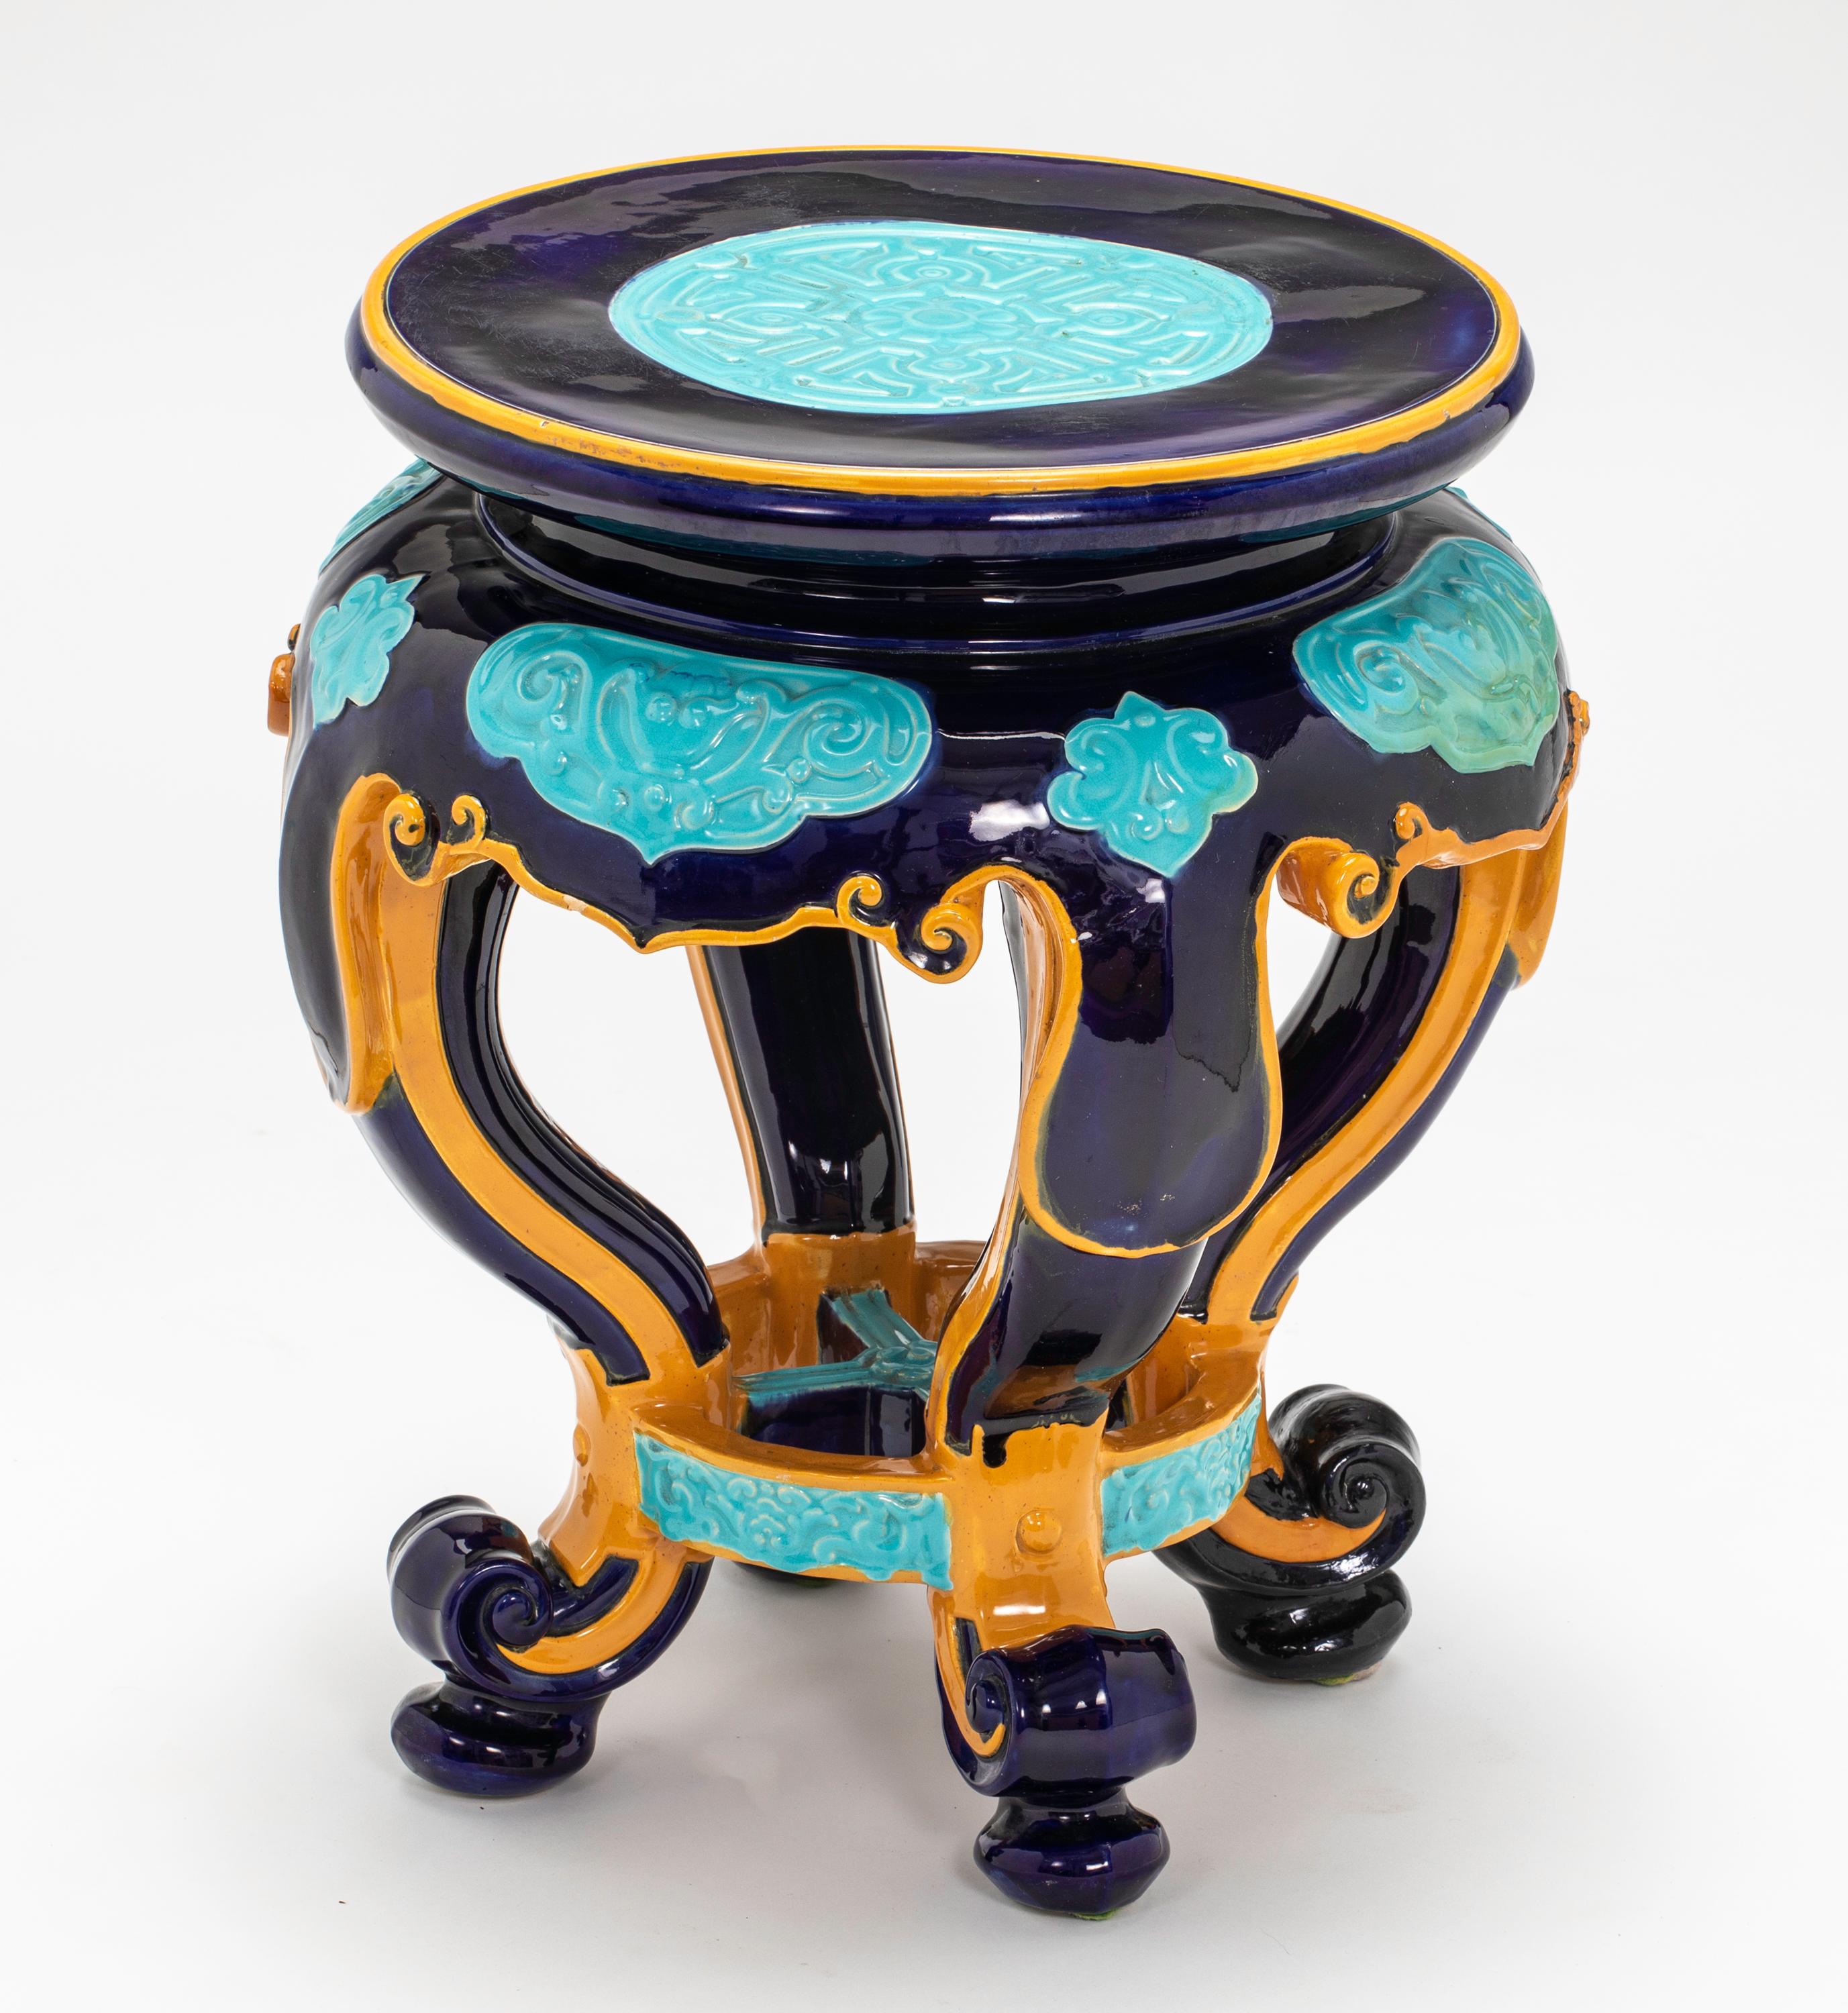 English Minton Majolica garden stool. Circular ceramic stool in colorful coloration of turquoise, cobalt blue and gold glaze. Styled in shaped aprons and four cabriole legs. Impressed Minton Mark, circa 1870.
Two very small old flea chips.